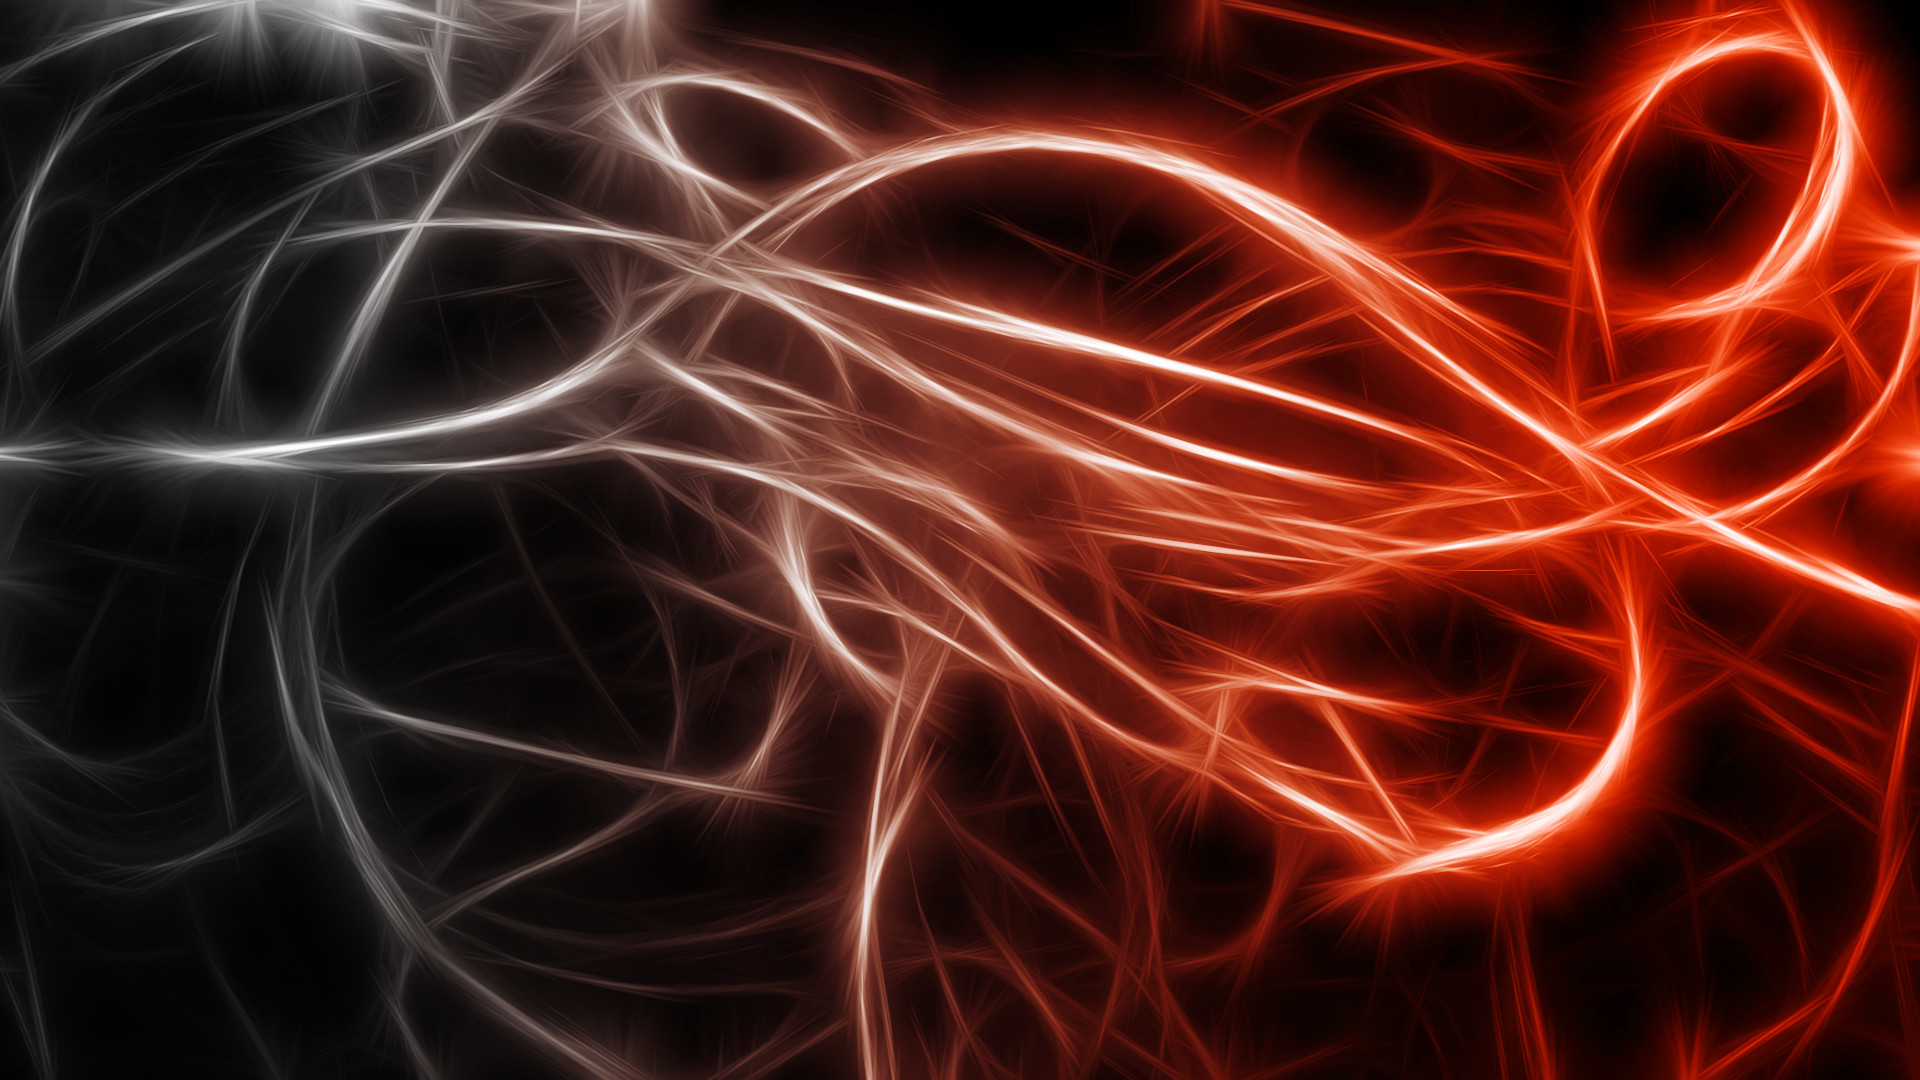 1920x1080 Red Flames wallpaper - 241833